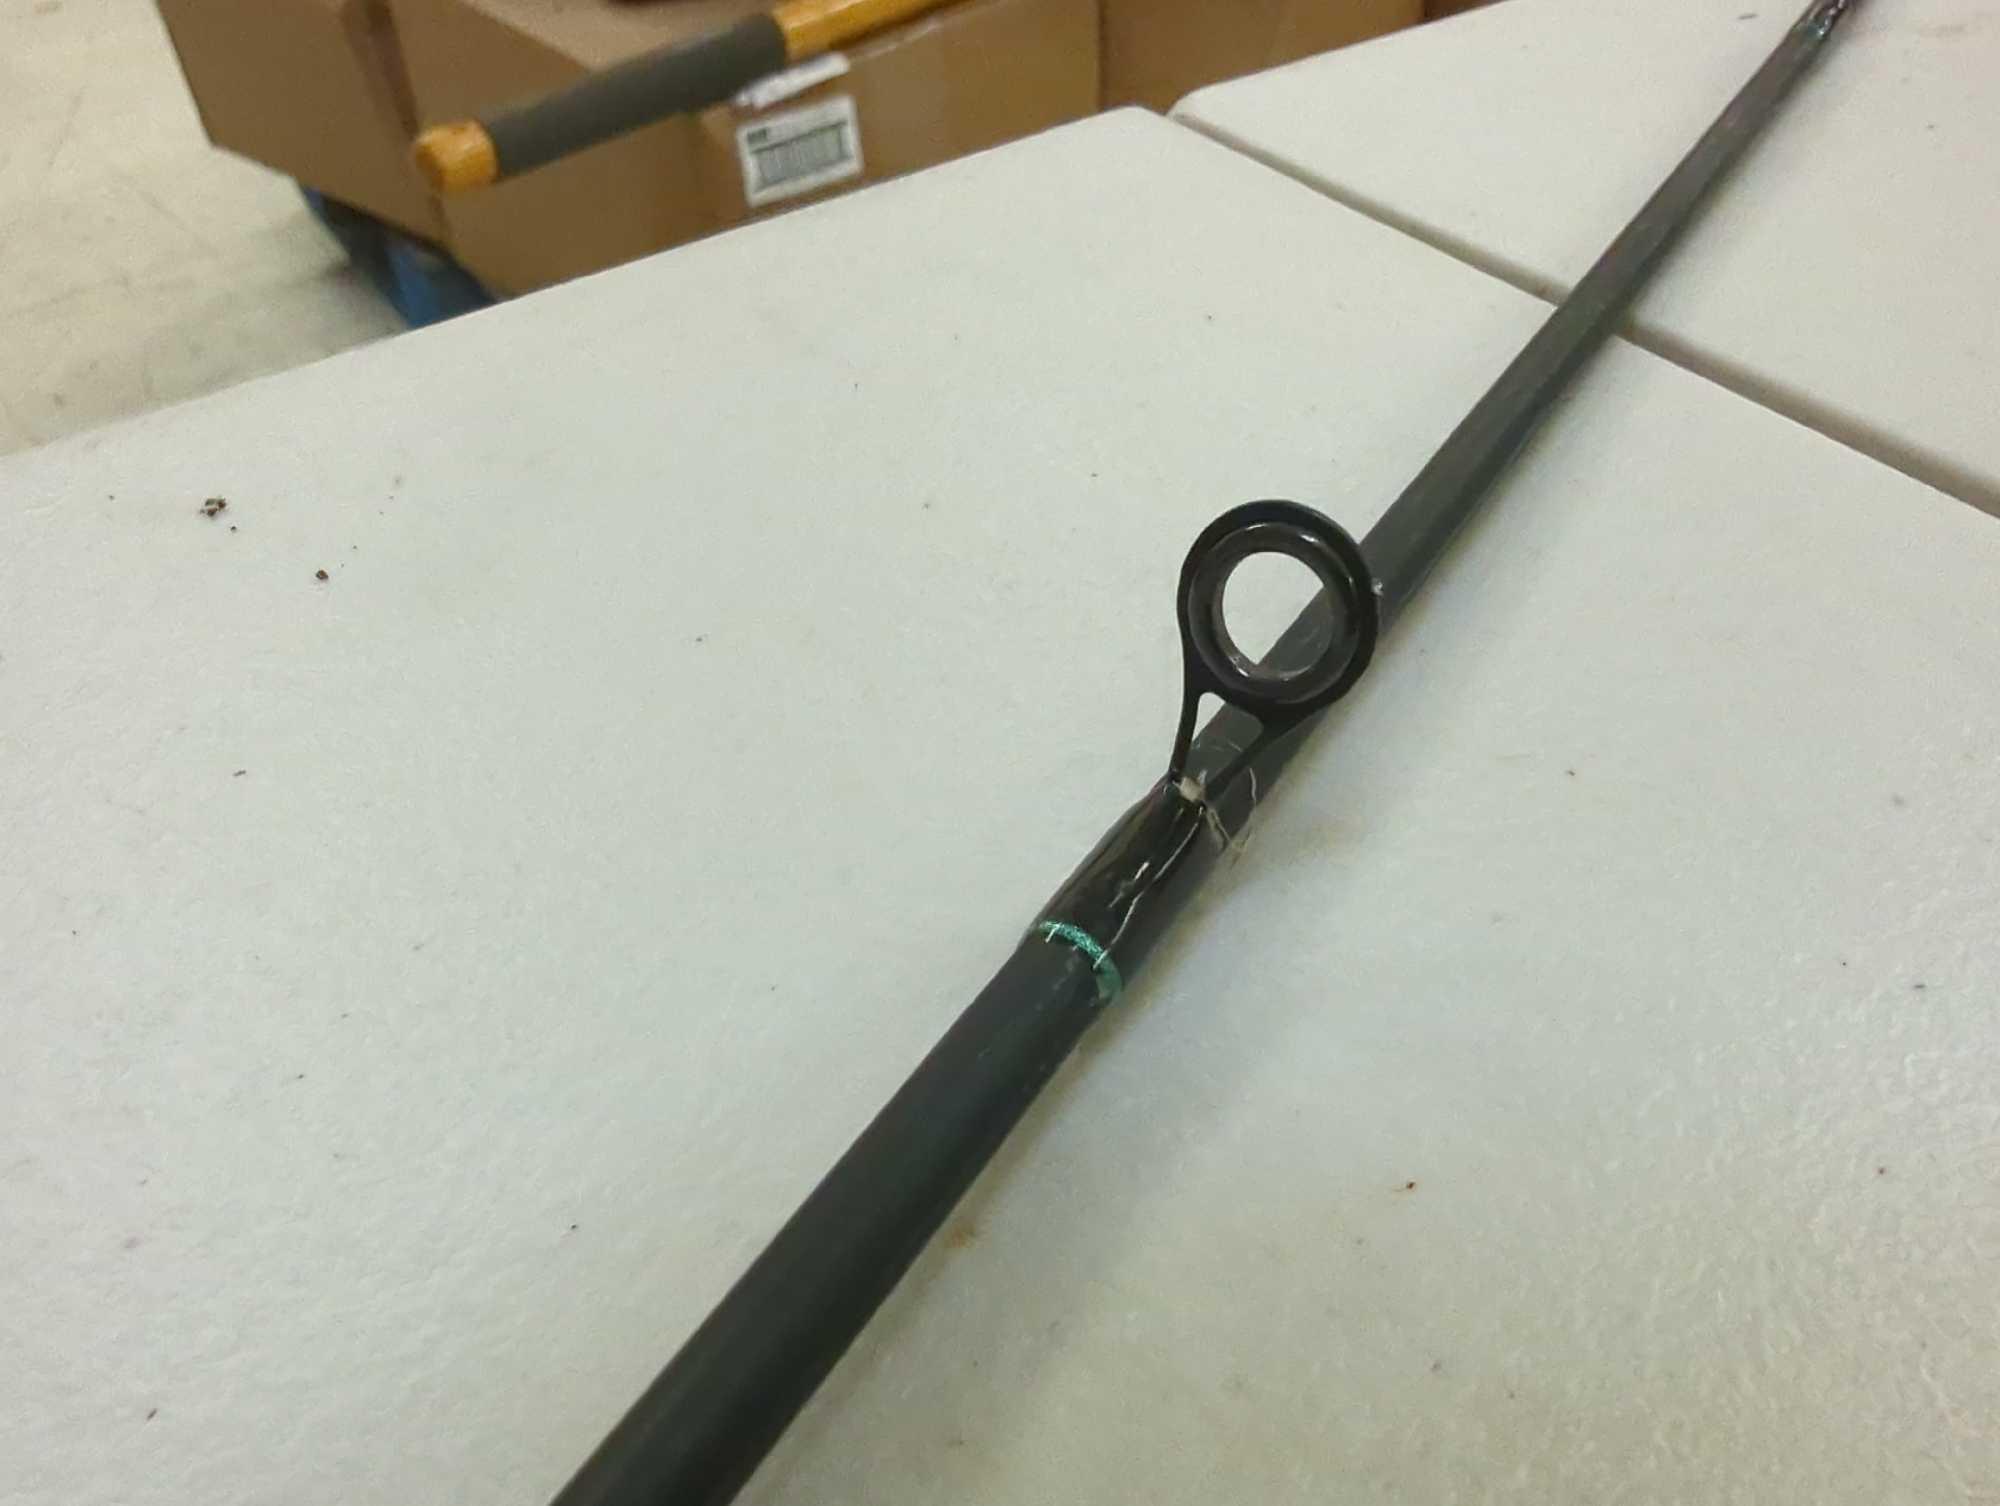 Pinnacle 6' limit fishing rod, Medium action. Line 10-20 lb As is shown in photos. Appears to be